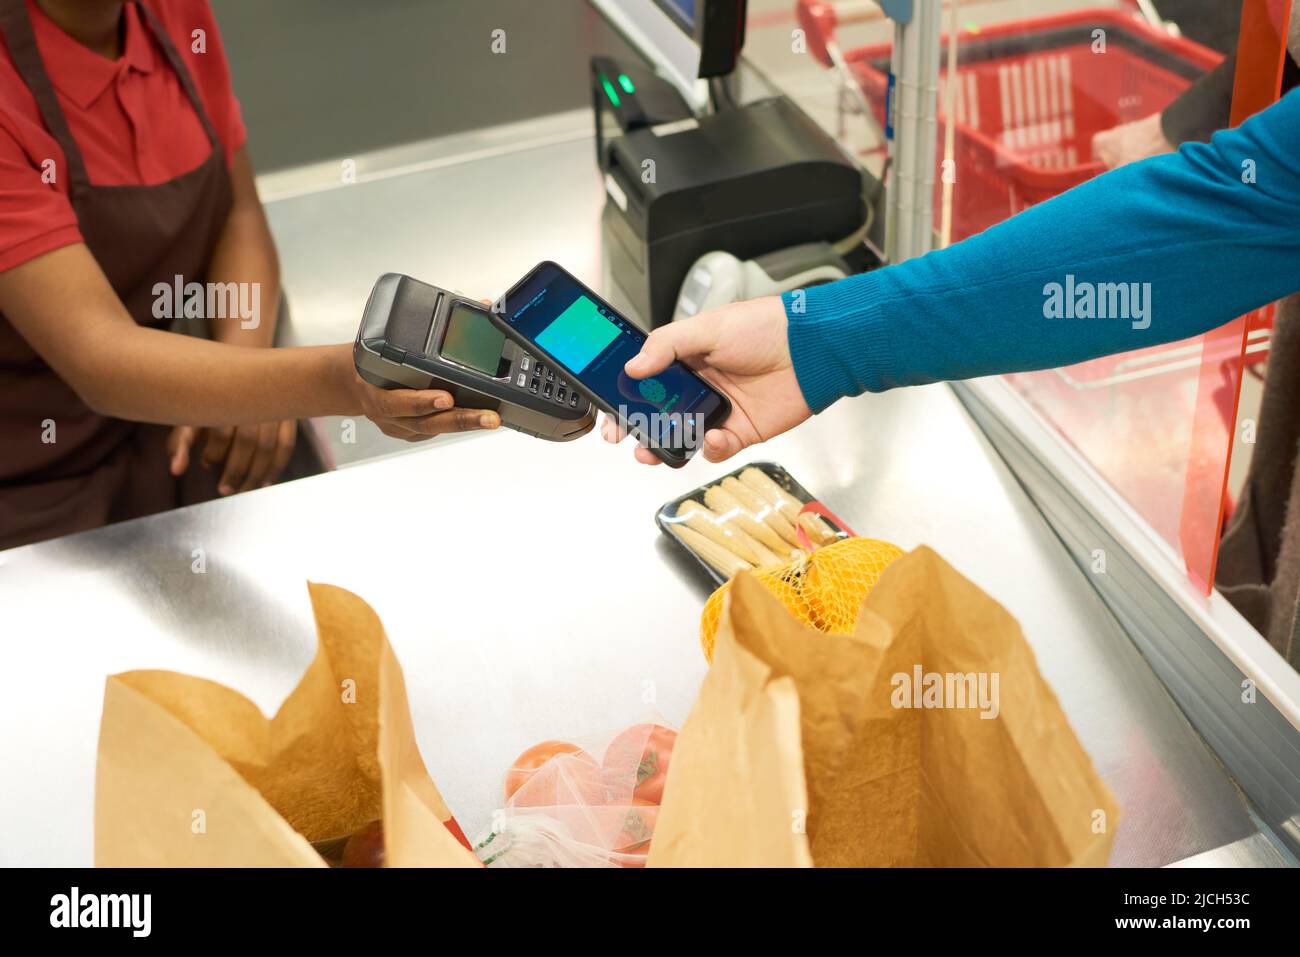 Hand of buyer holding smartphone and that of salesperson with payment terminal over counter with packed food products in supermarket Stock Photo